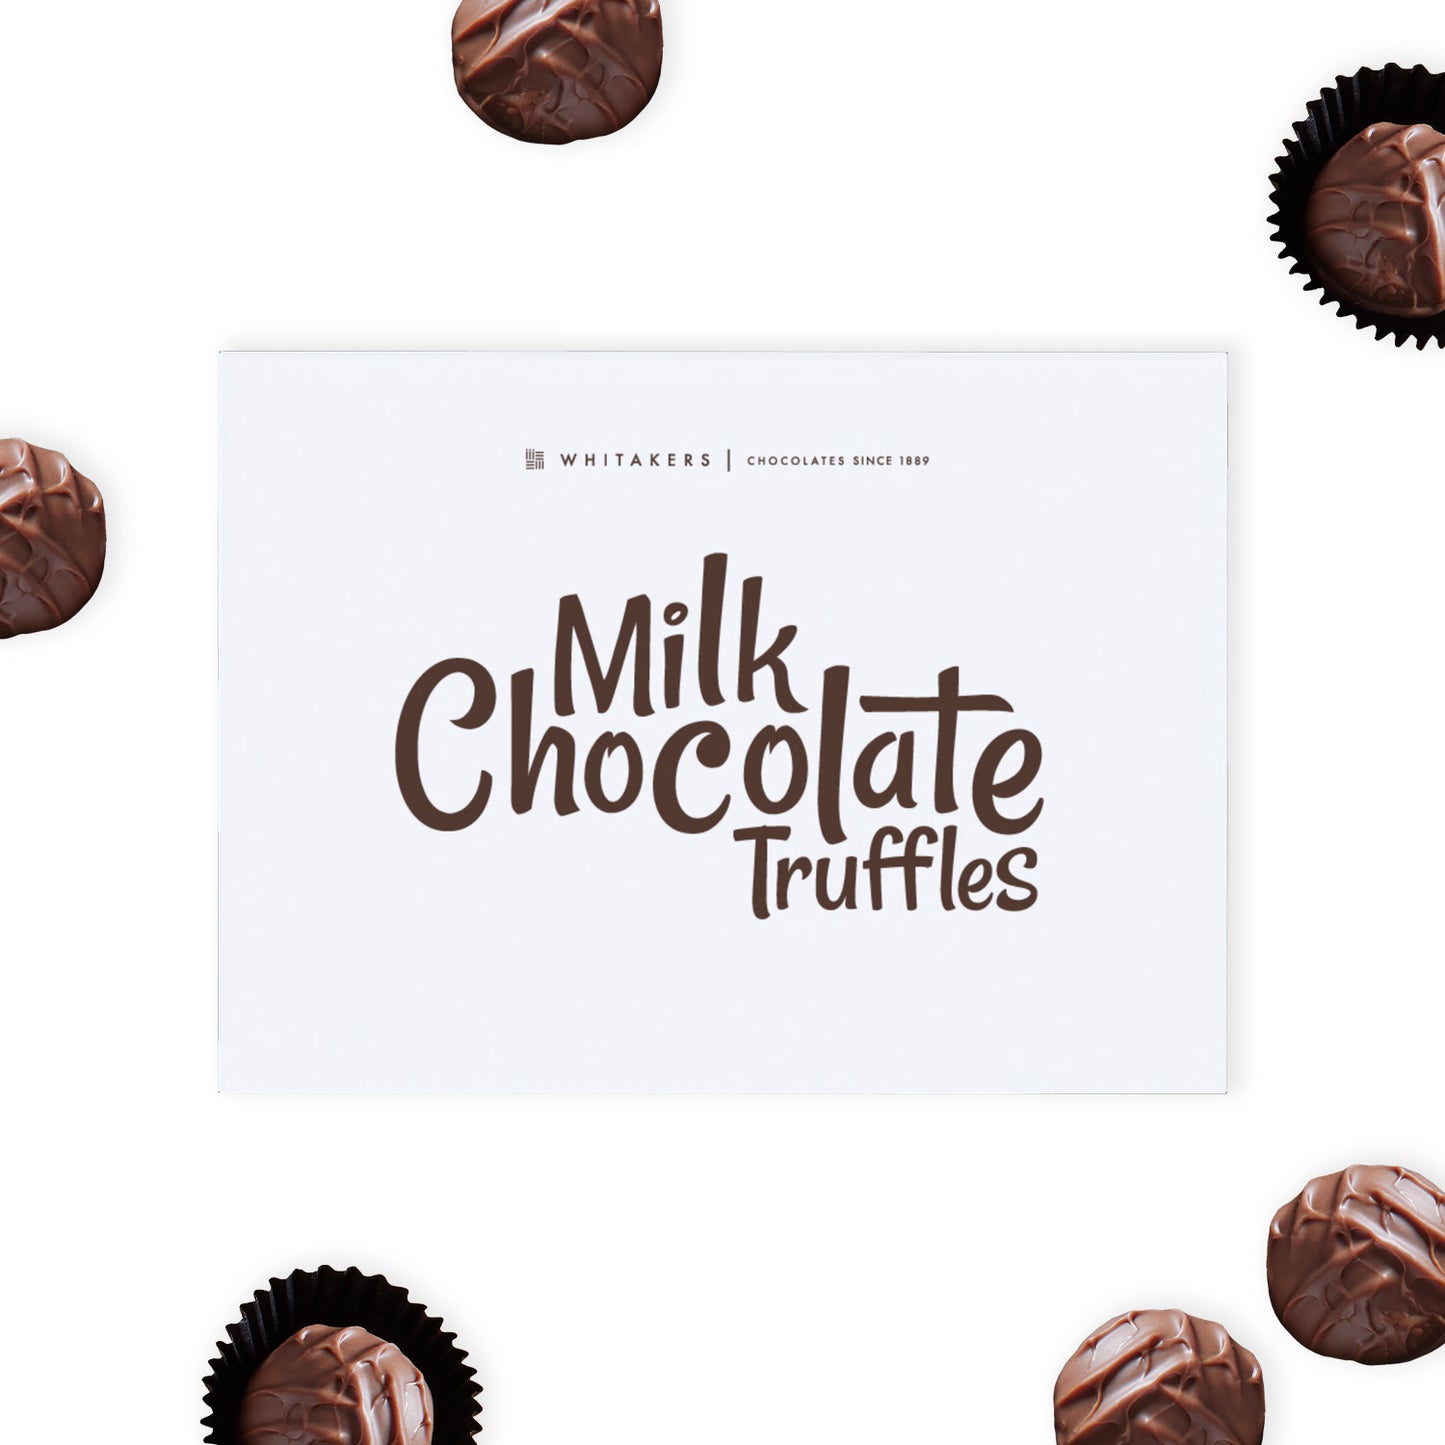 Luxury Milk Chocolate Truffles. This exquisite gift box contains twelve hand-finished truffles, each featuring a lusciously soft and creamy milk chocolate ganache centre, lovingly encased in a smooth milk chocolate shell